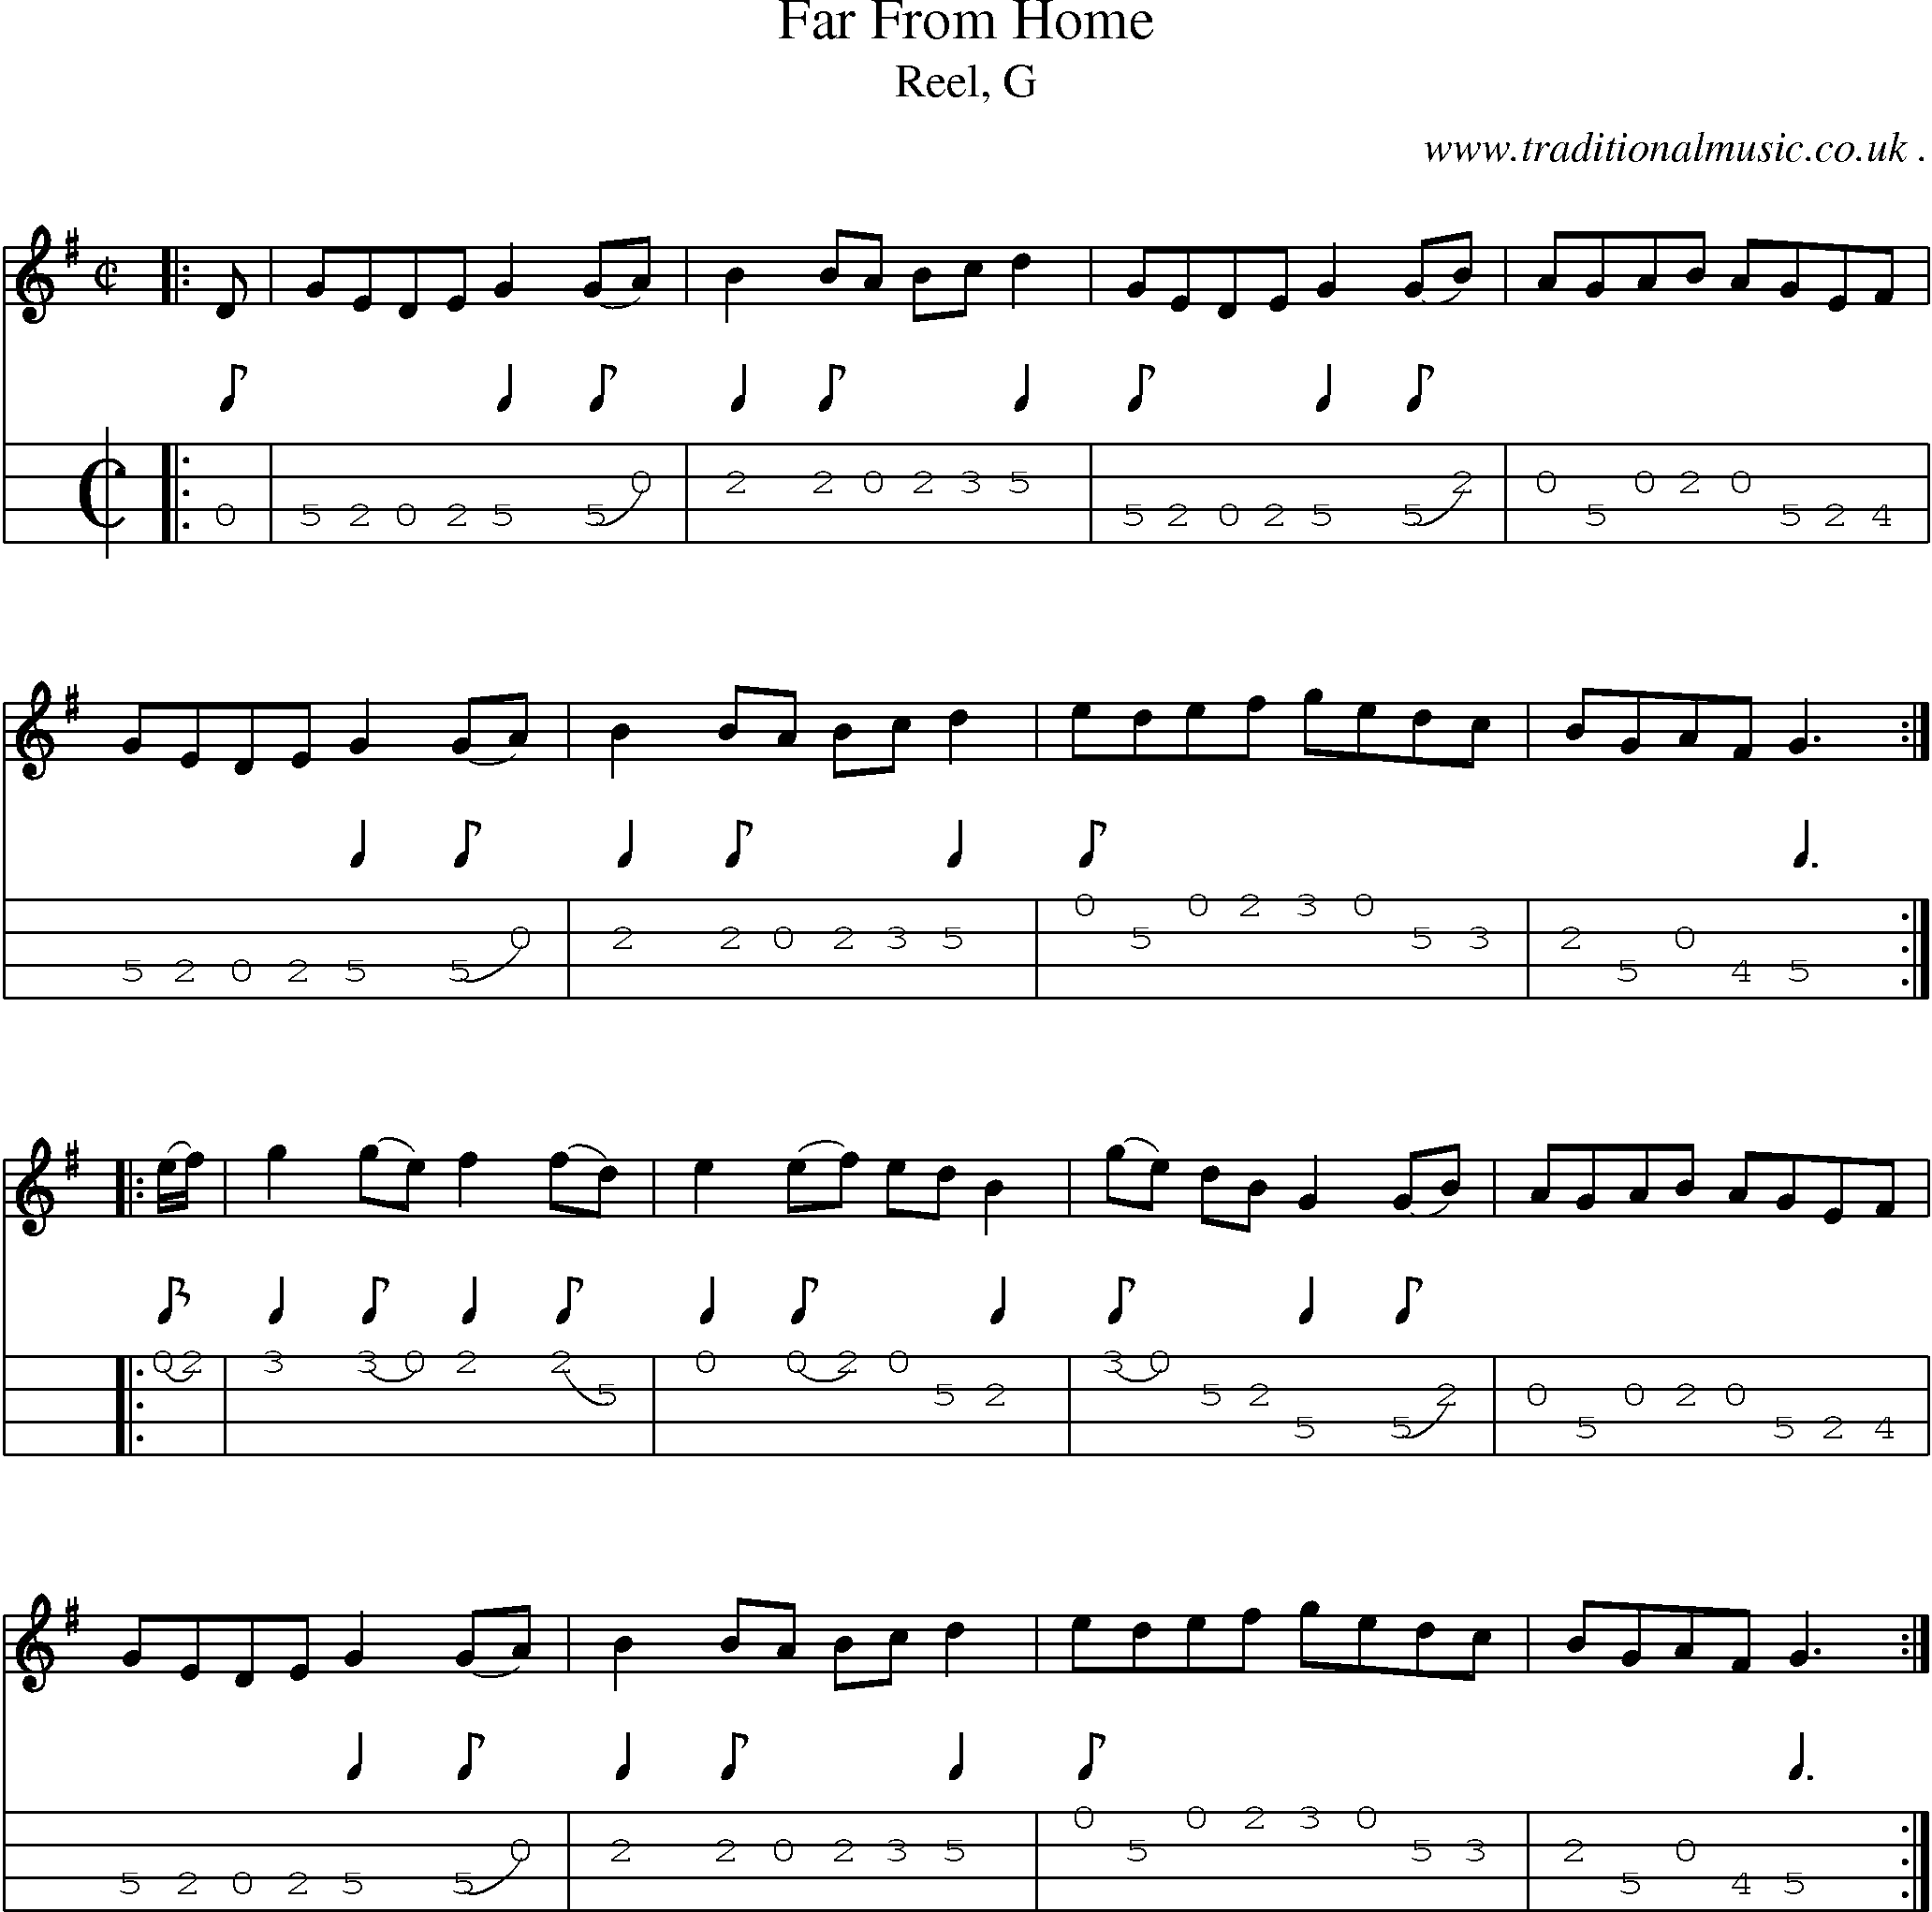 Sheet-music  score, Chords and Mandolin Tabs for Far From Home